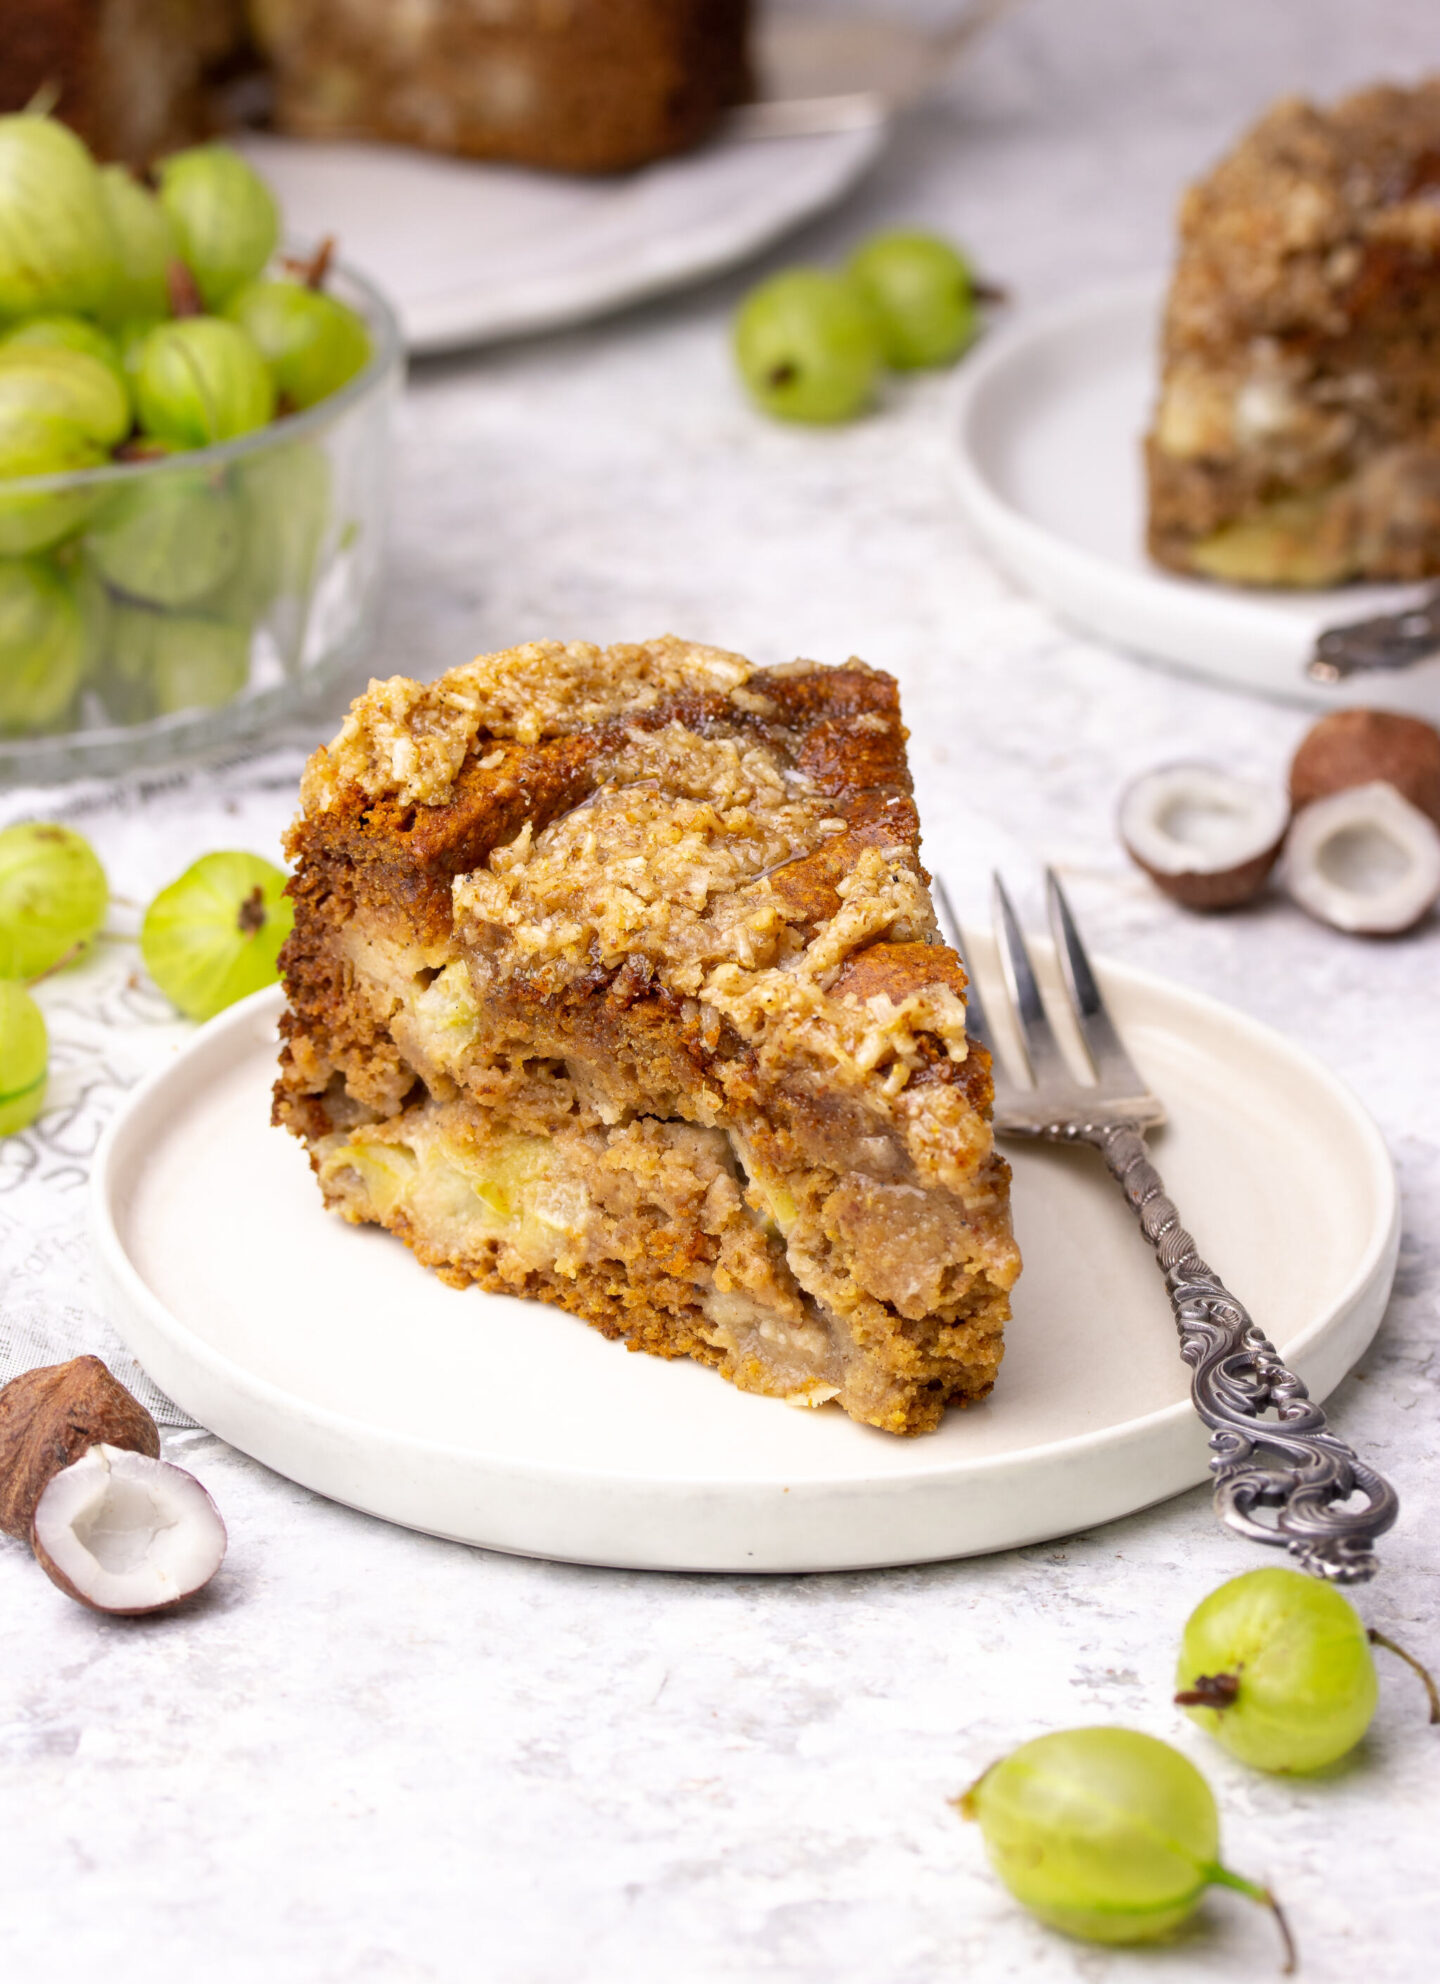 Gooseberry Cake with Coconut & Caramel